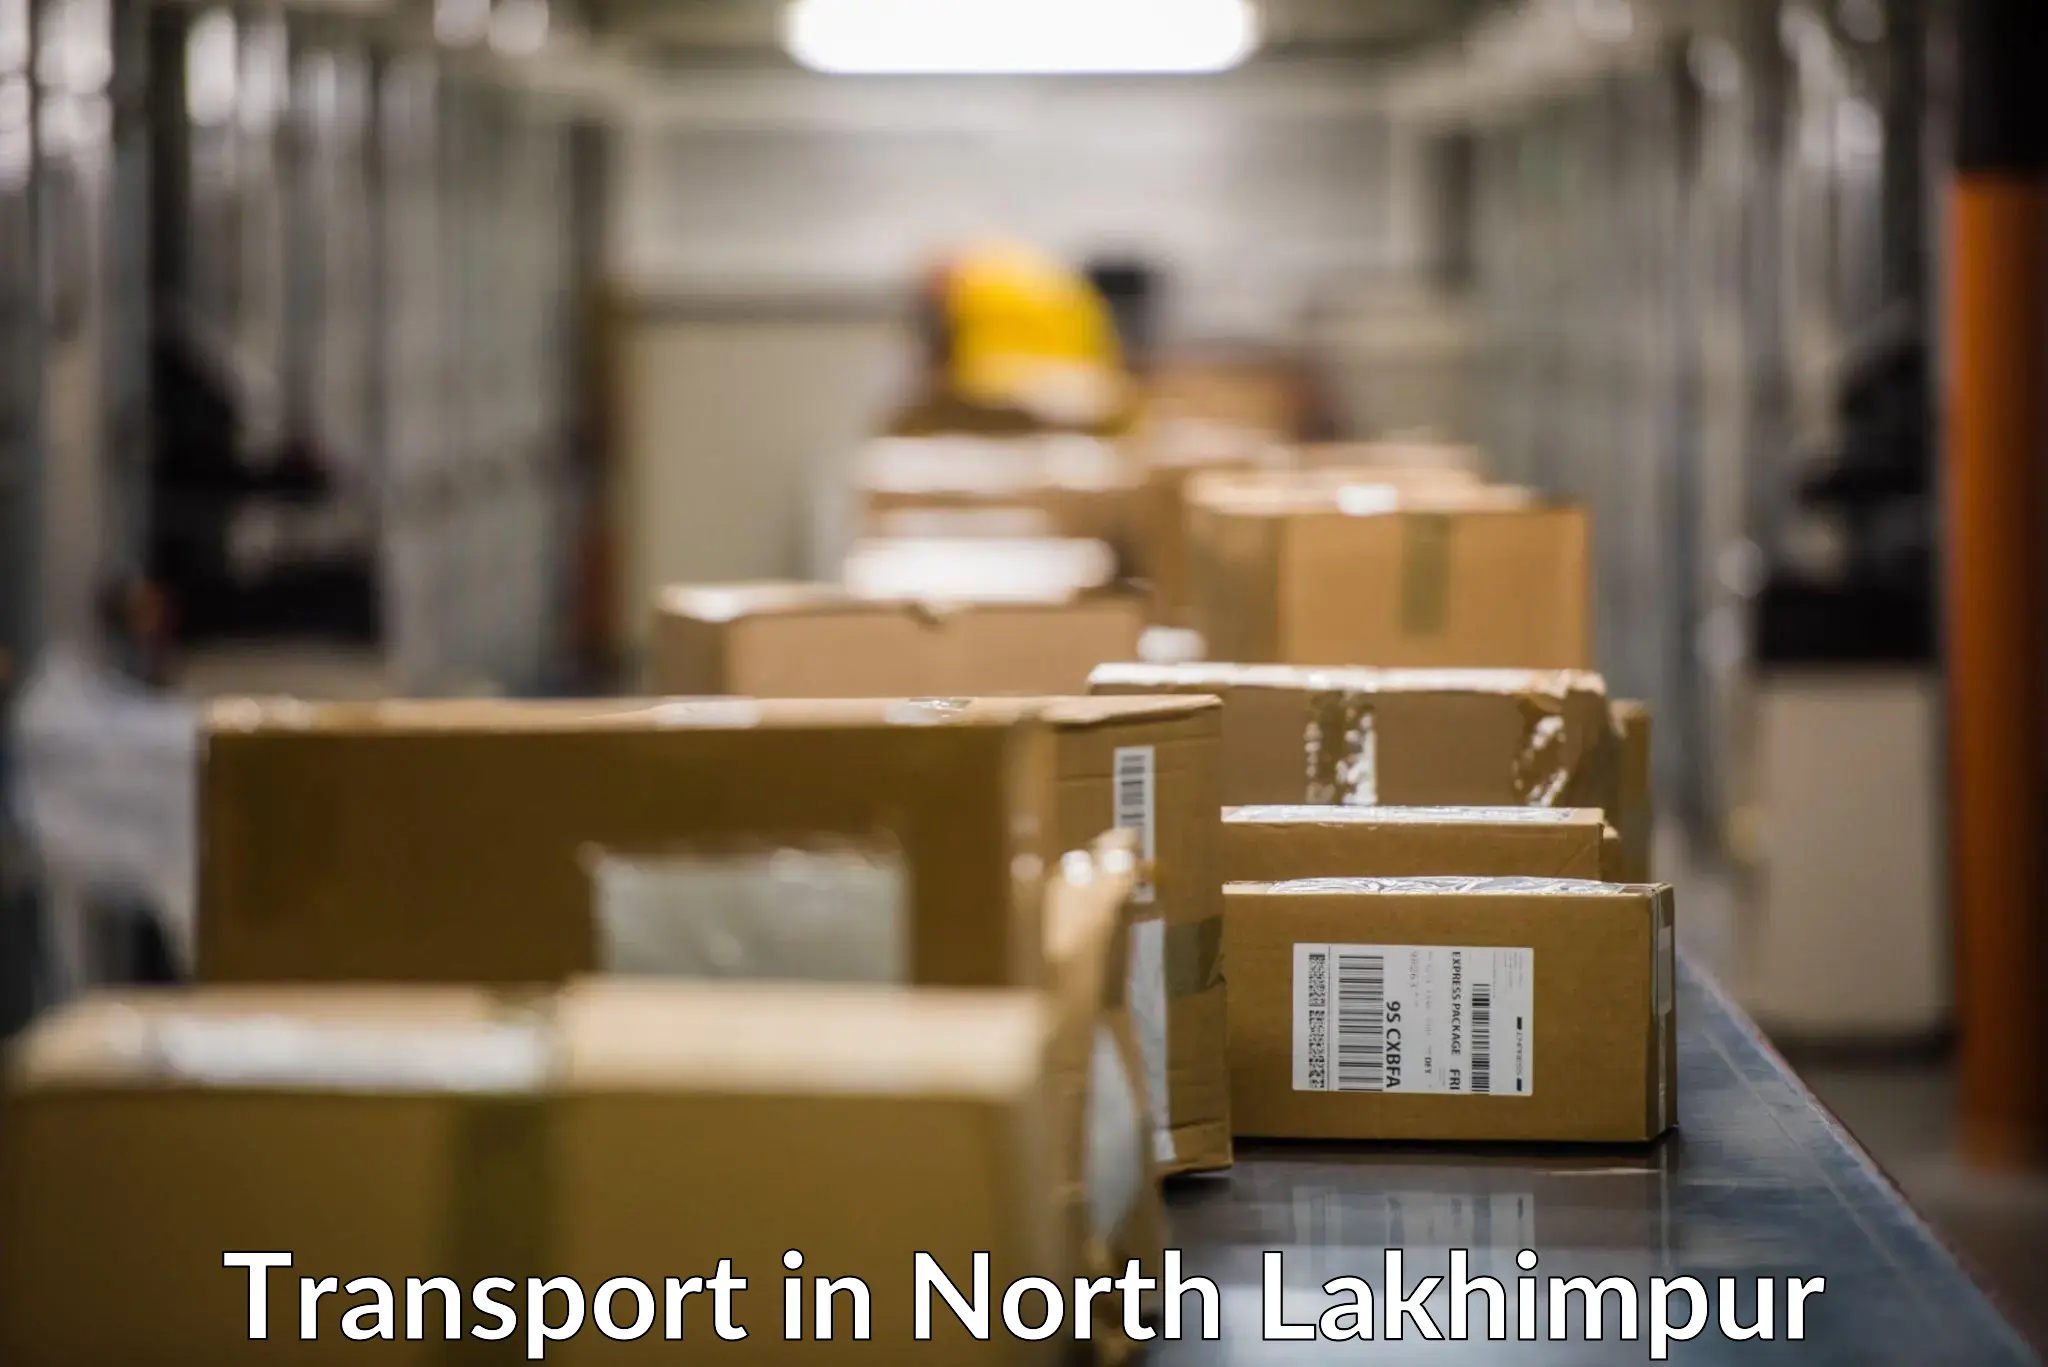 Cargo train transport services in North Lakhimpur